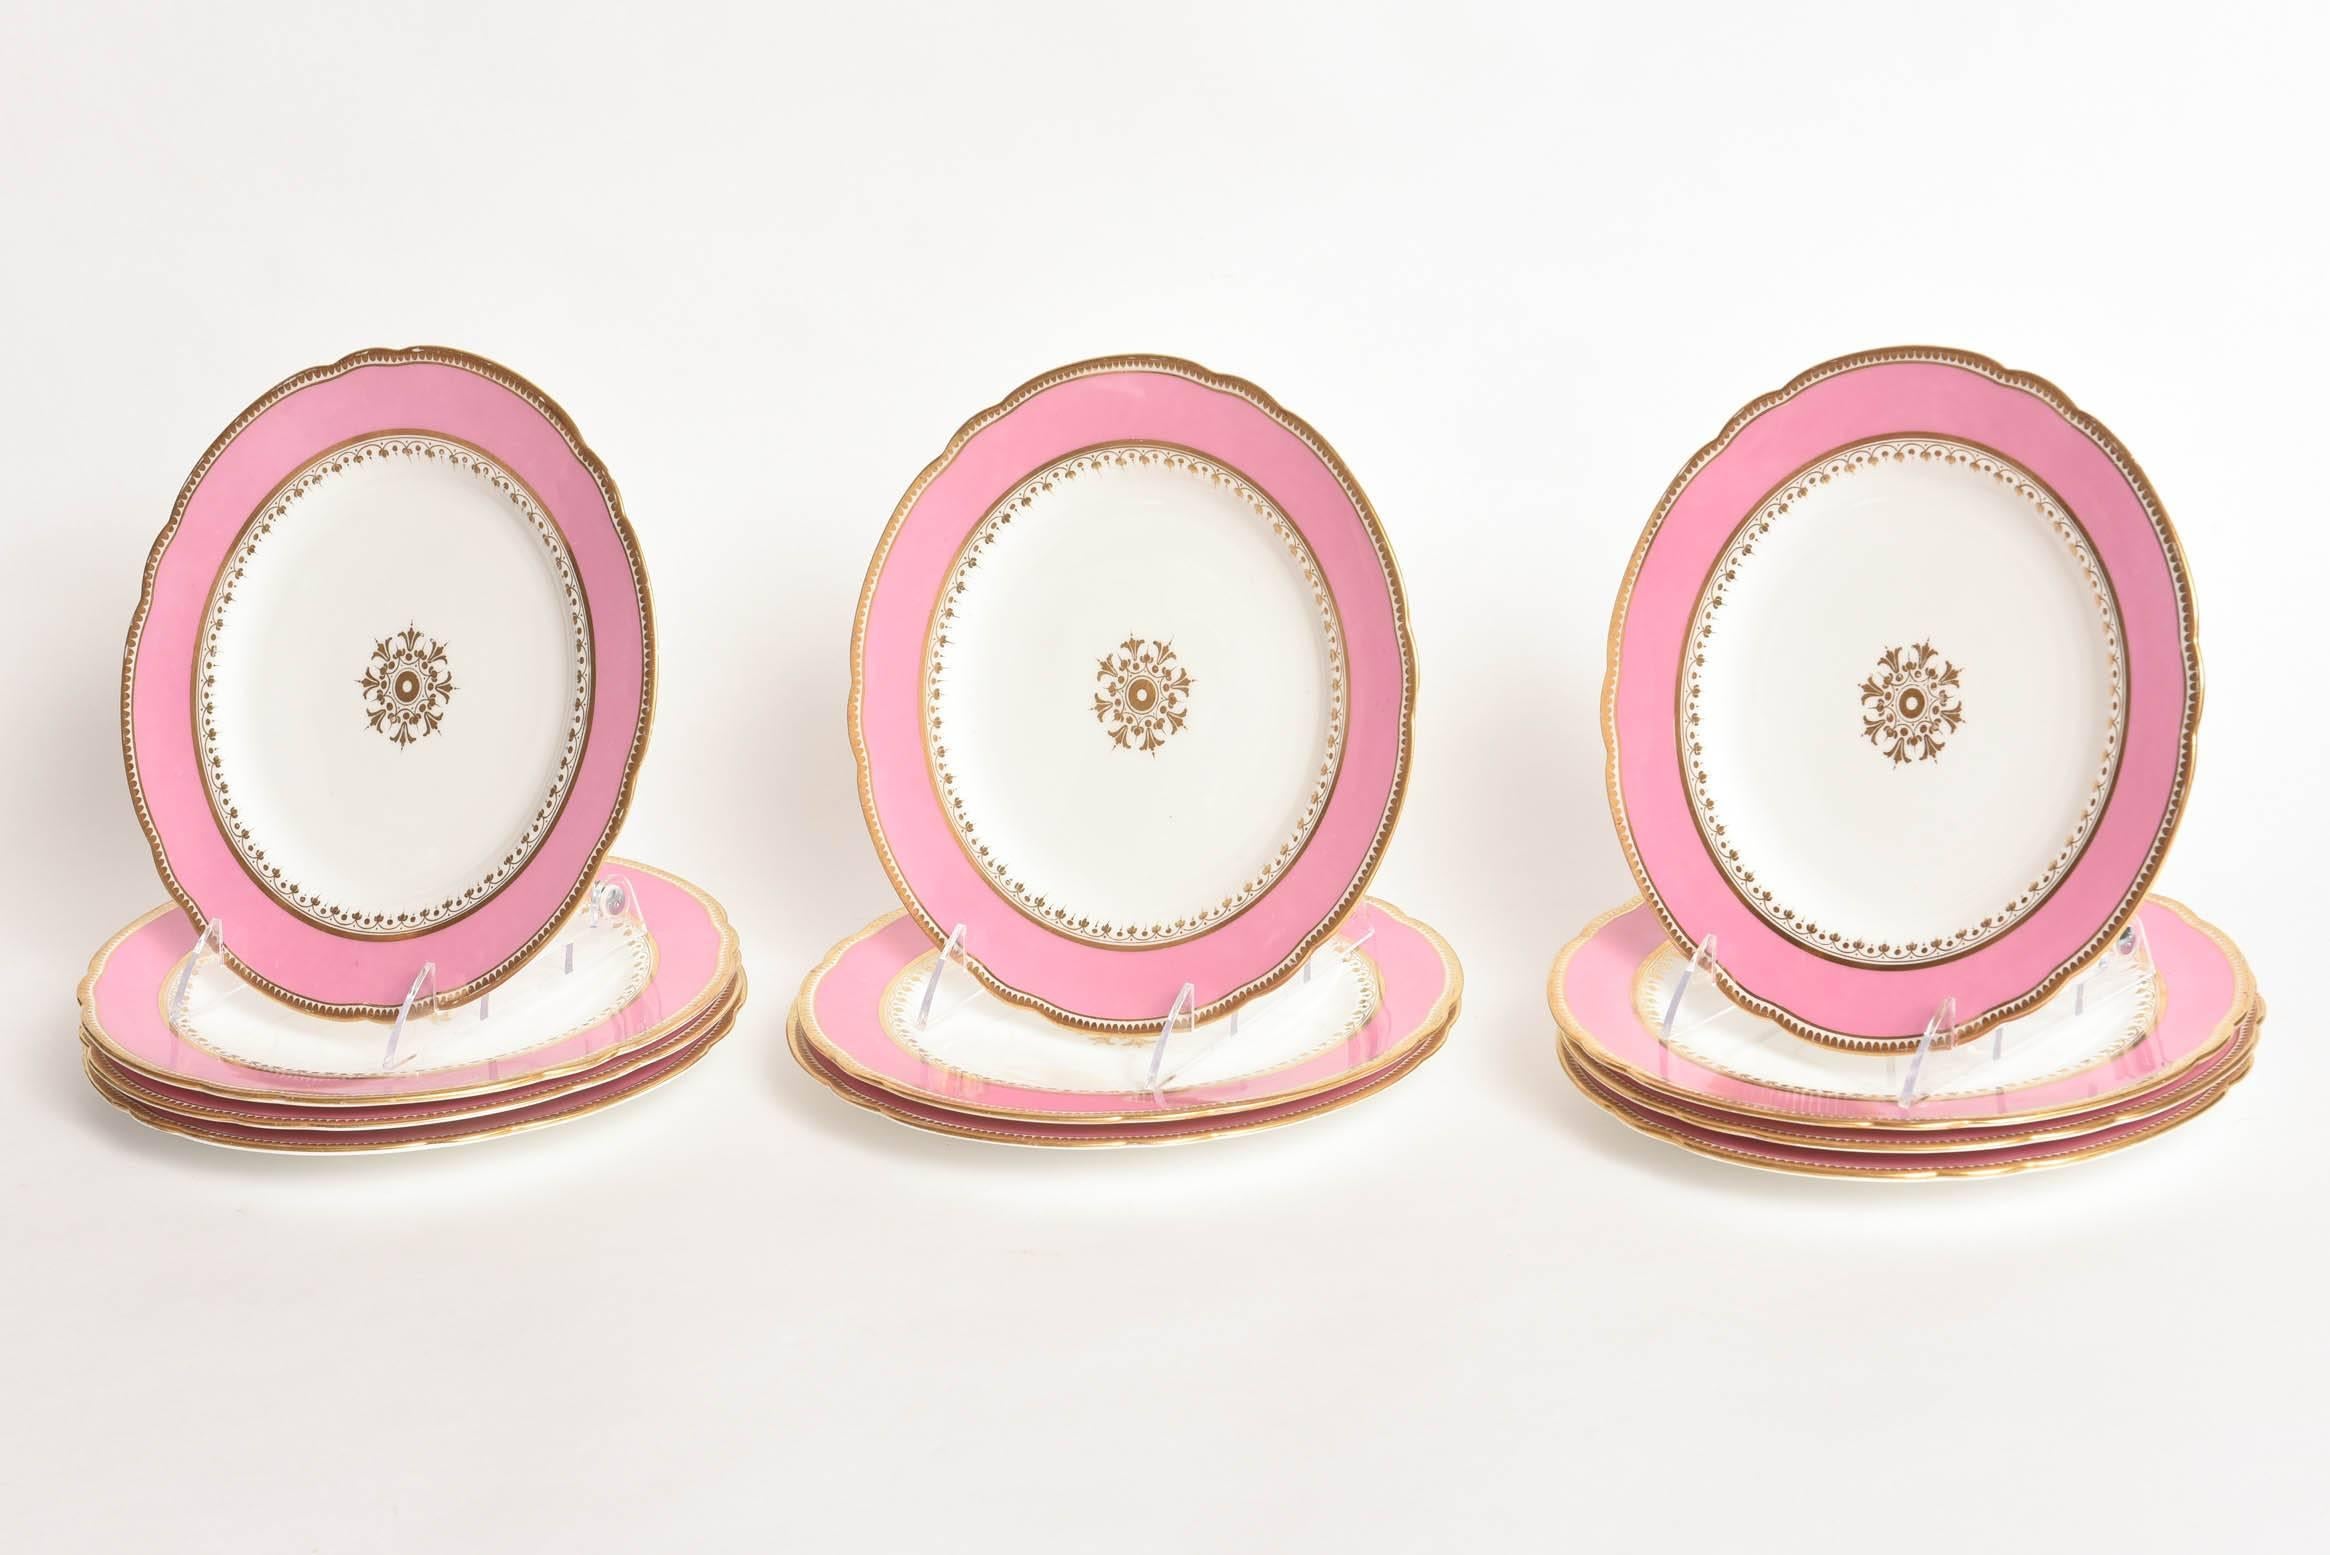 An elegant set of gilt trimmed plates featuring vibrant pink collars and a centre medallion. Perfect for first course, salad or dessert and retaining almost all of their center medallions where we usually see the age wear first. Crisp white